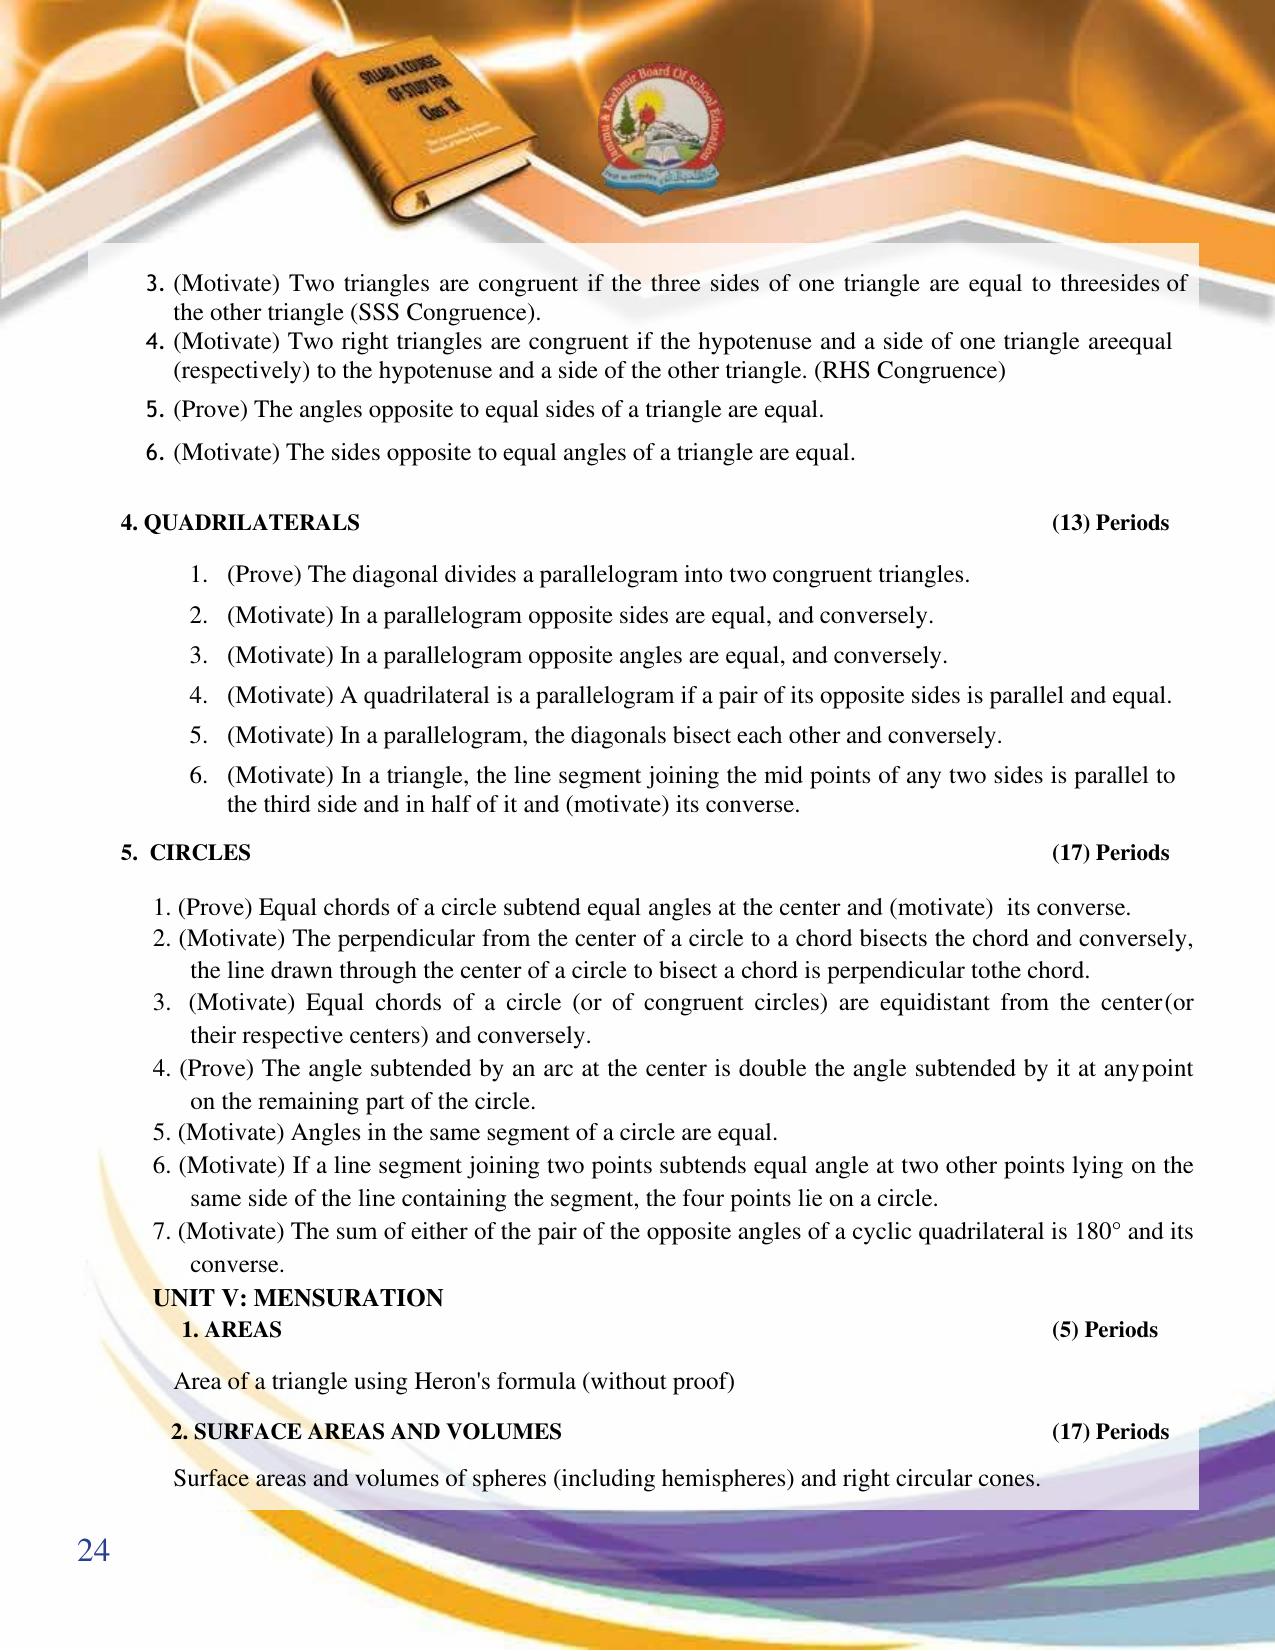 JKBOSE Syllabus for 9th class - Page 25